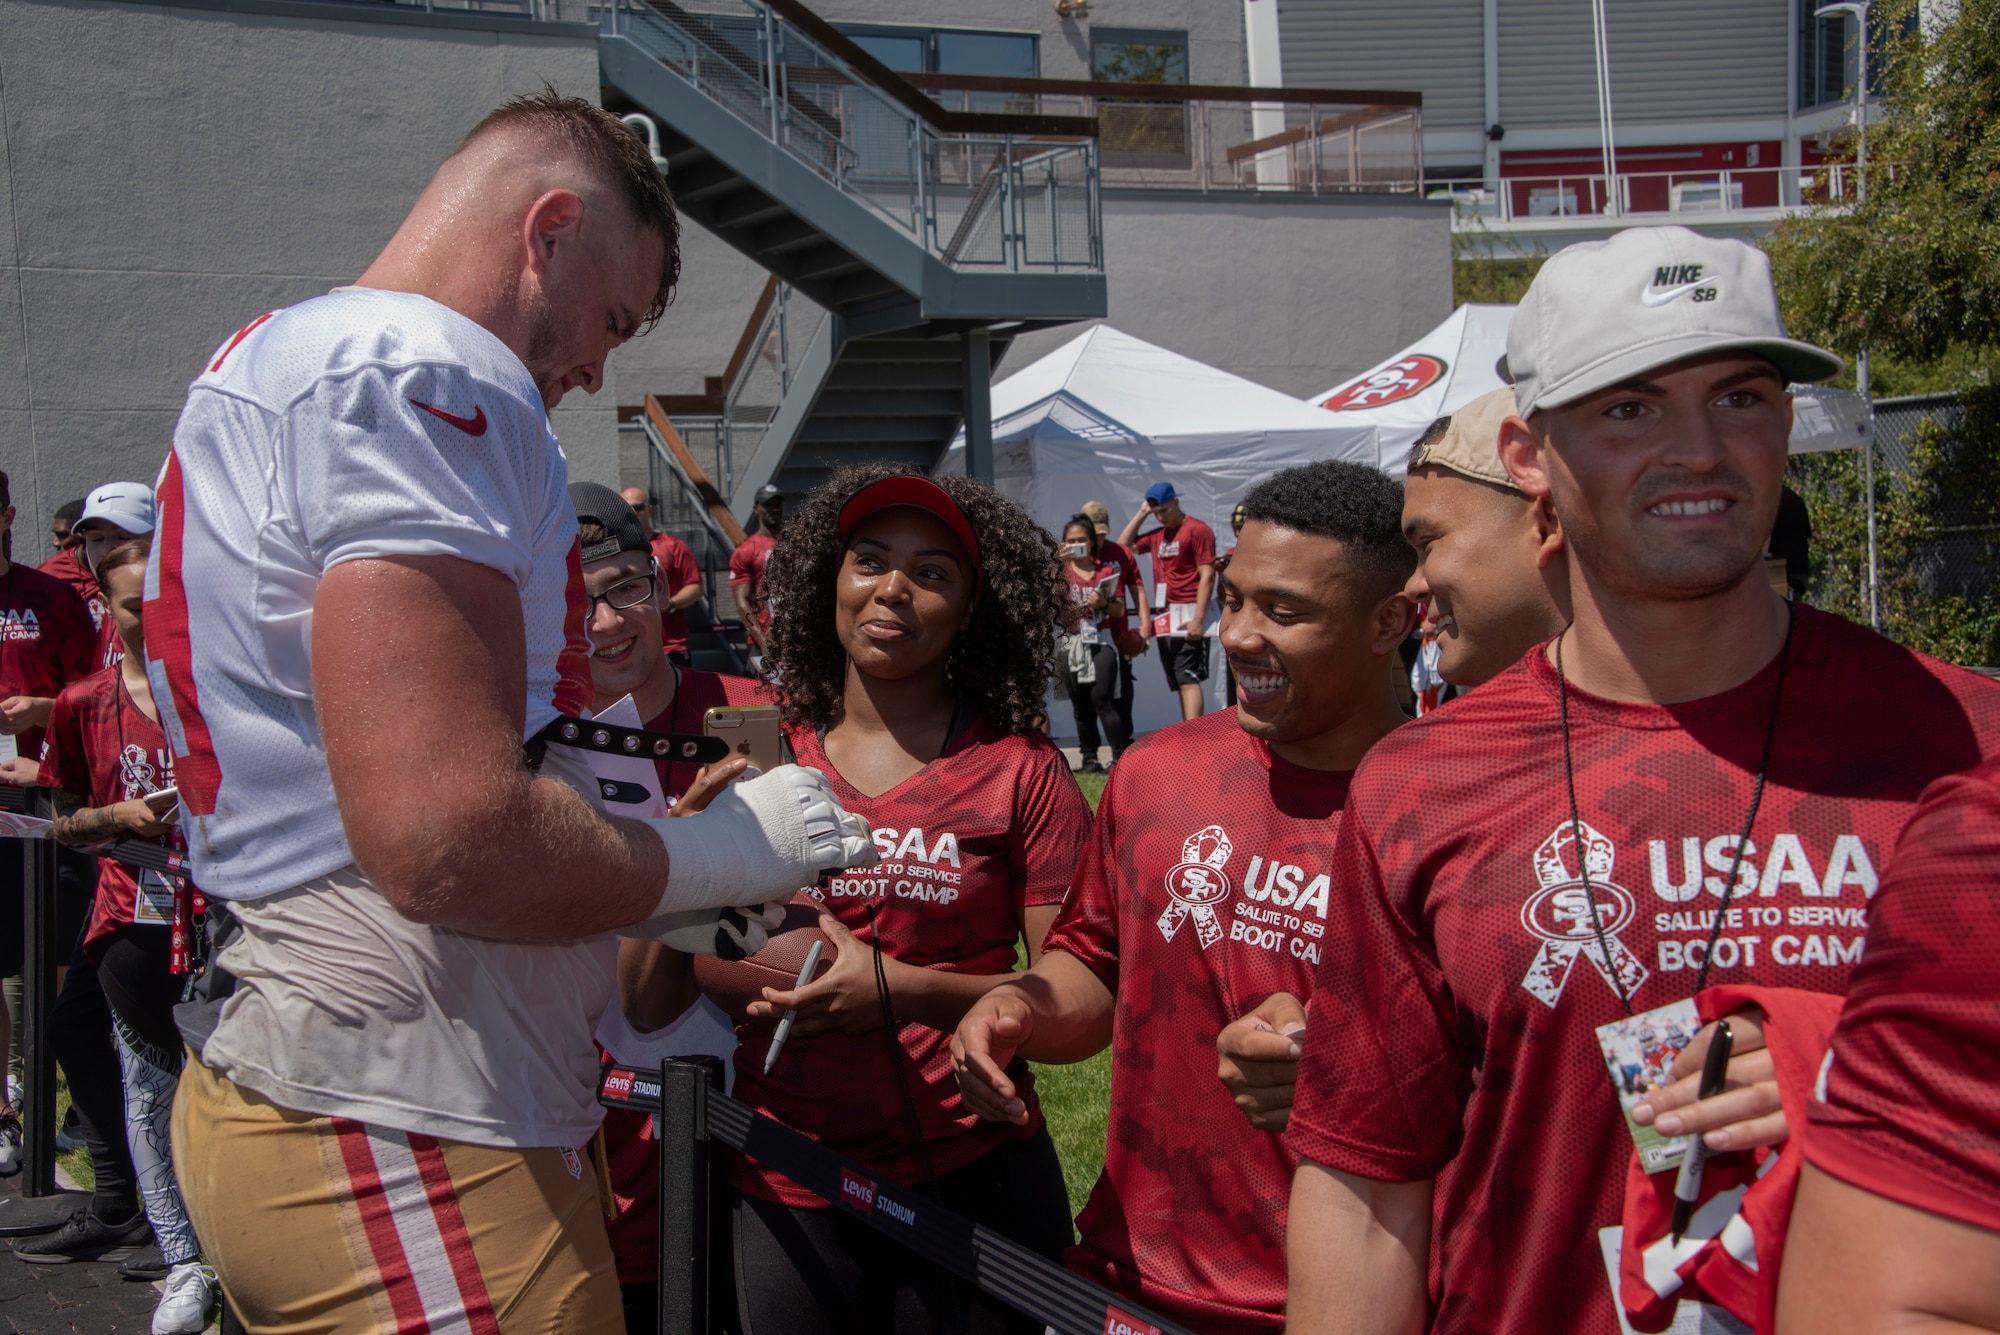 San Francisco 49ers offensive lineman Mike McGlinchey signs autographs for Airmen from Travis Air Force Base, California, Aug. 13, 2019, during the Salute to Service Boot Camp event in Santa Clara, California. The event provided Airmen with an opportunity to interact with NFL players and compete against one another in a variety of athletic drills. (U.S. Air Force photo by Tech. Sgt. James Hodgman)